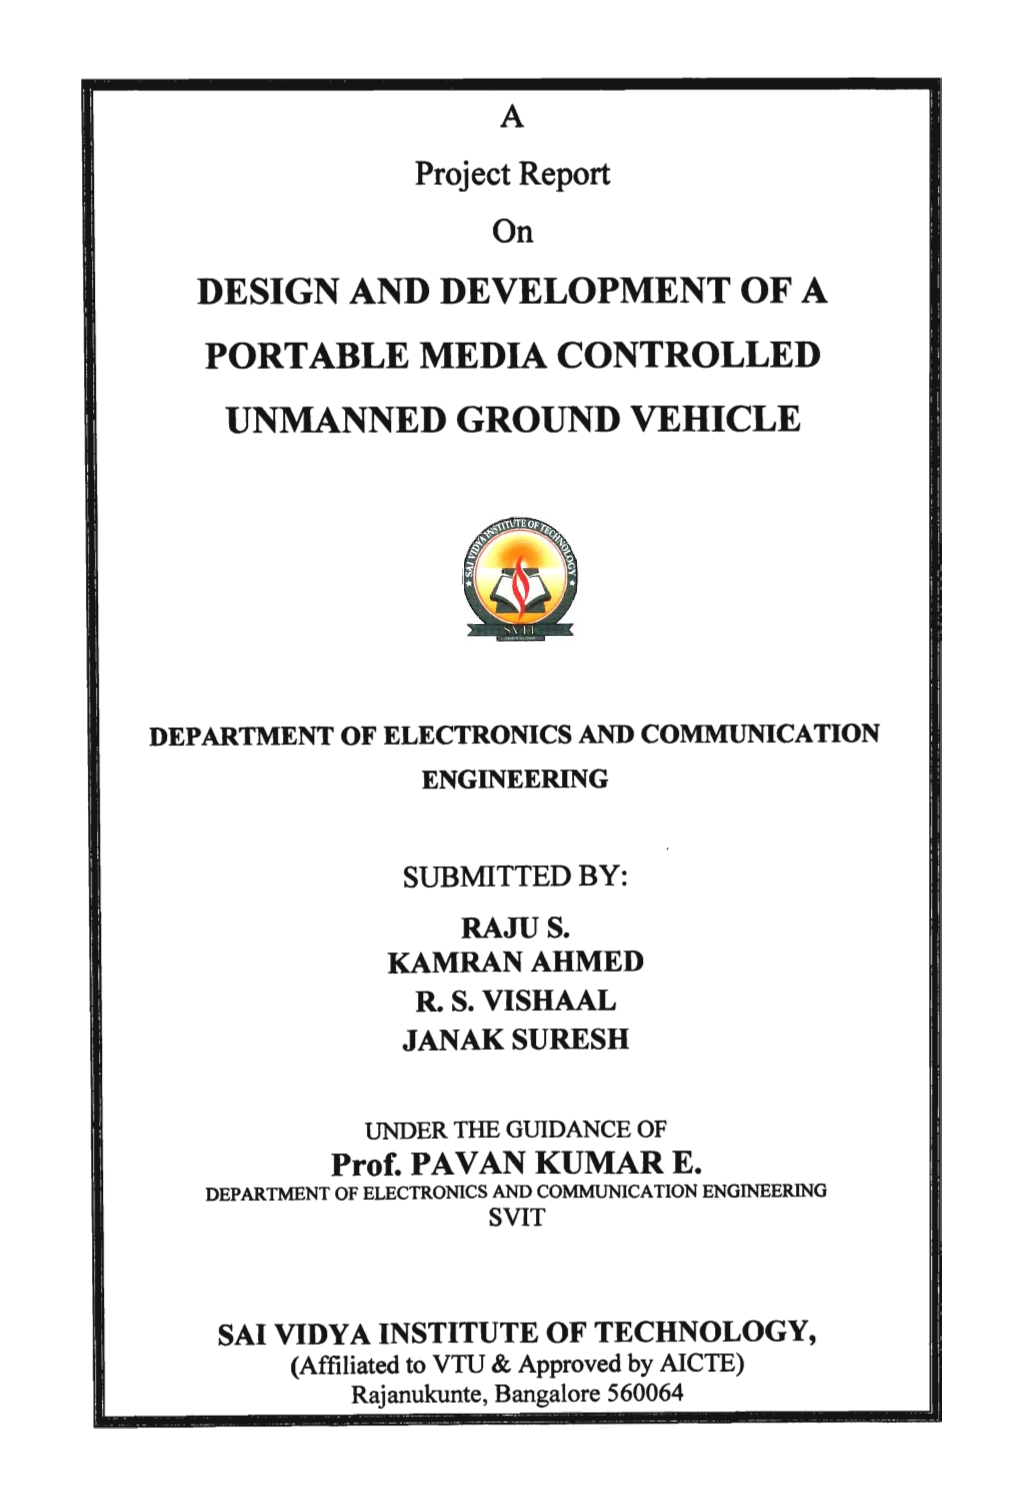 Design and Development of a Portable Media Controlled Unmanned Ground Vehicle